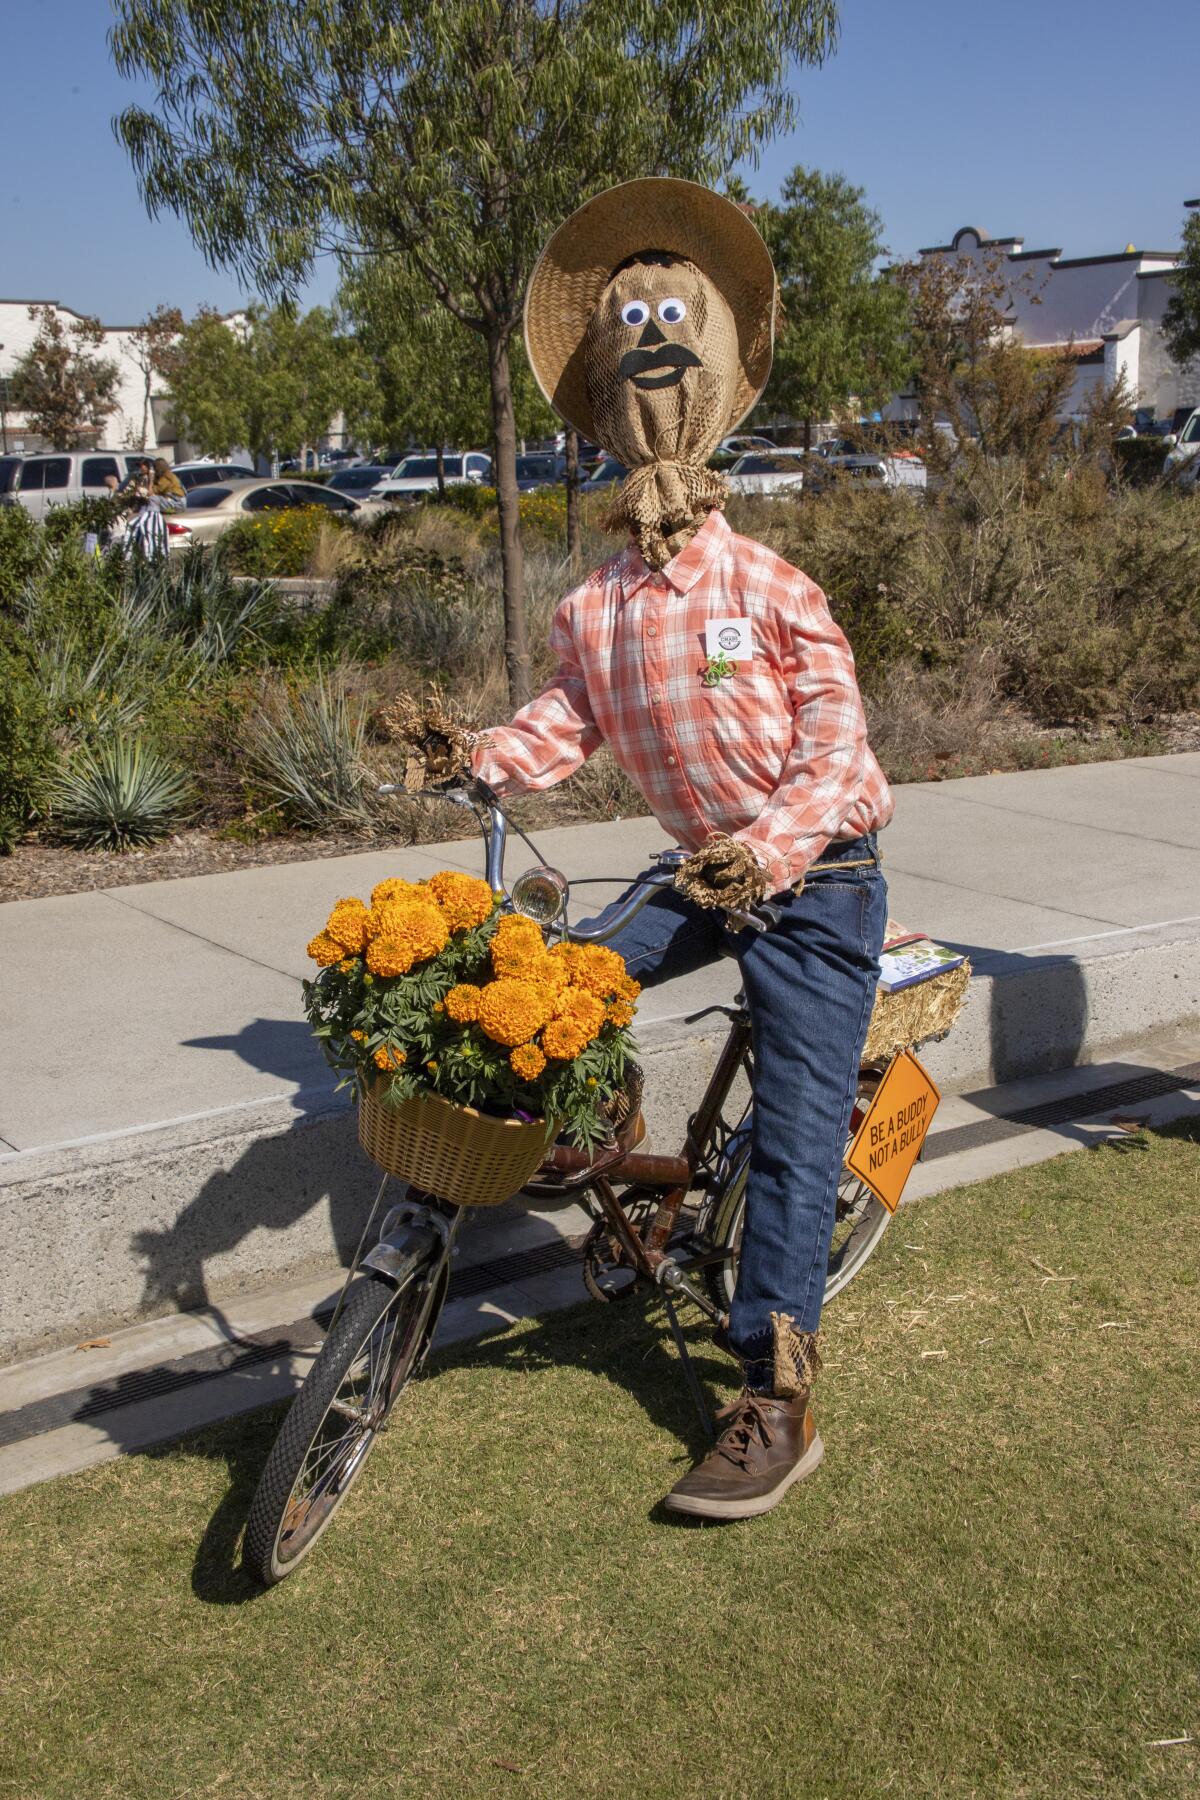 "Scarecrow on Wheels" took top honors at the 2021 Scarecrow Festival in Costa Mesa.